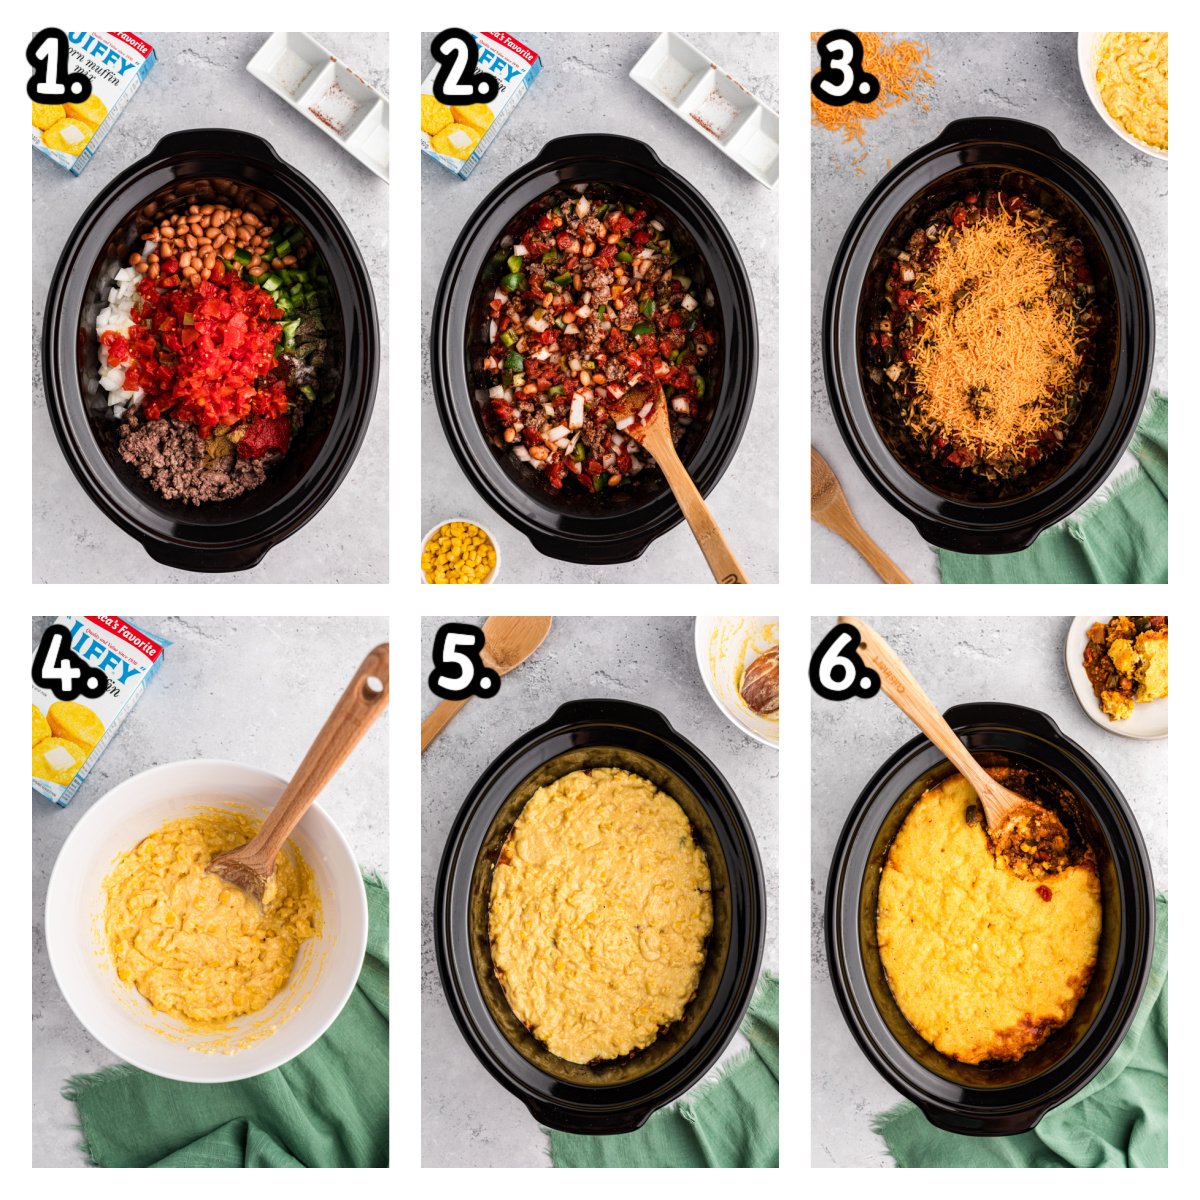 Six images showing how to make tamale pie in a slow cooker.